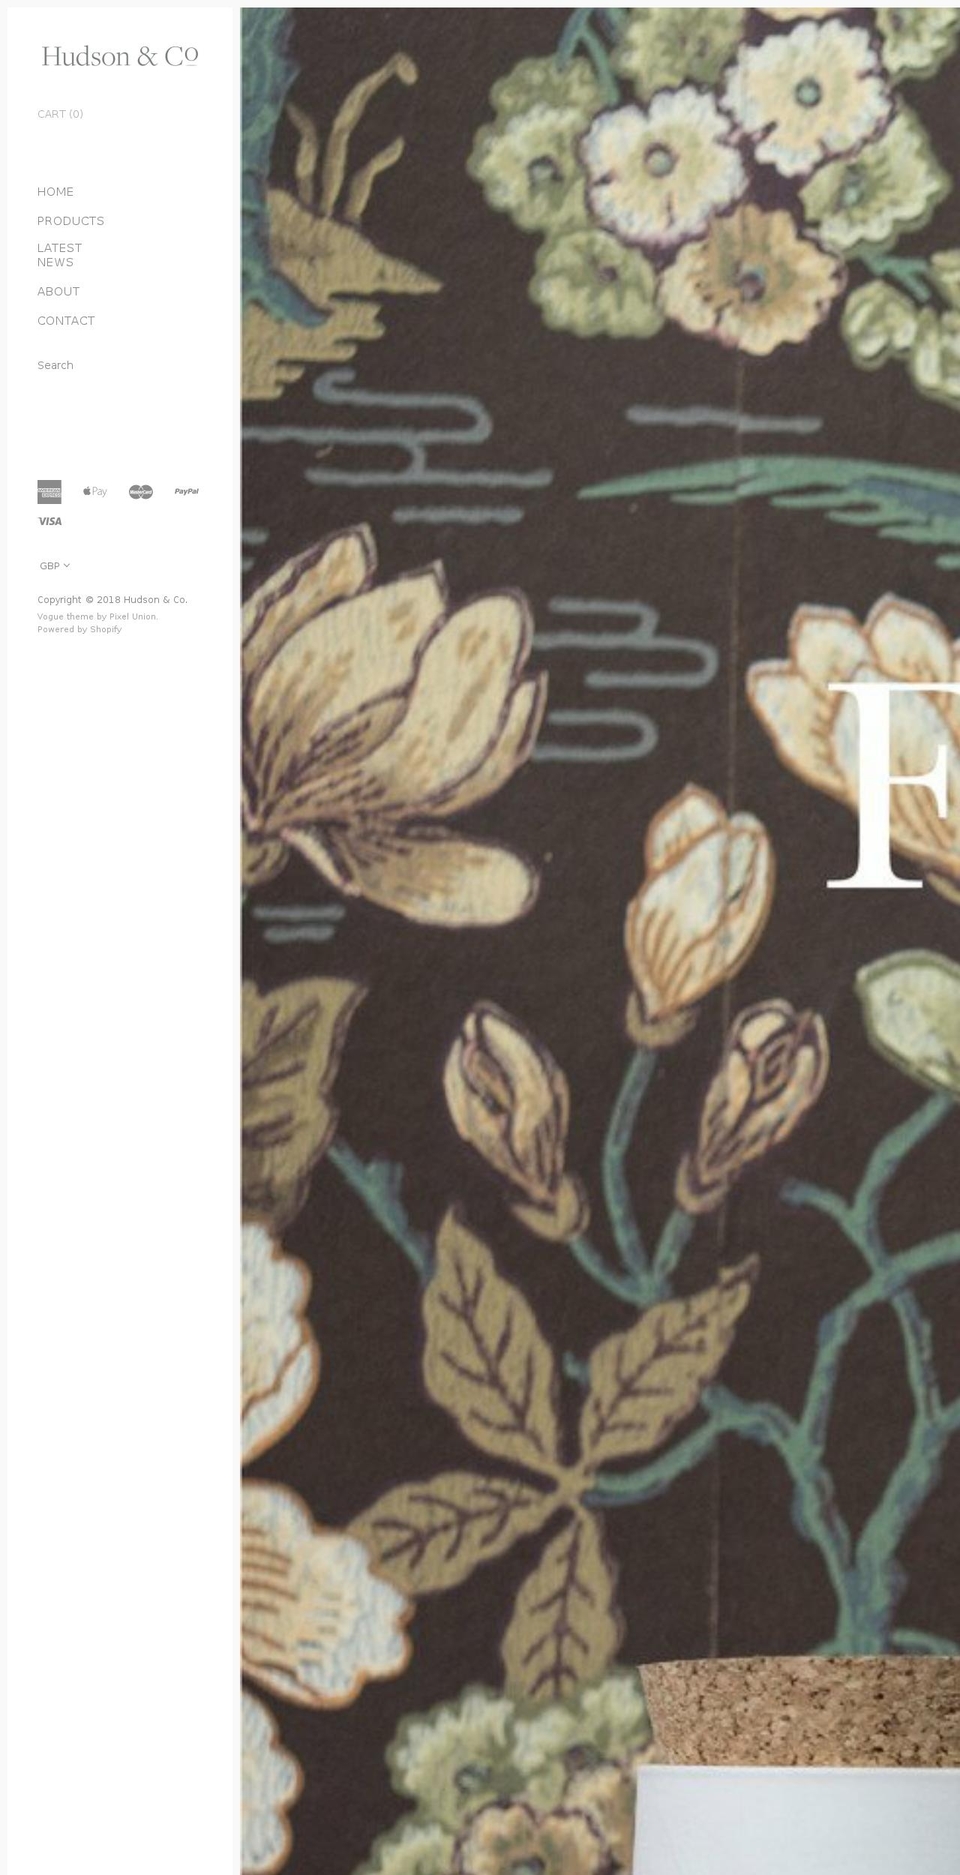 Vogue Shopify theme site example hudsonand.co